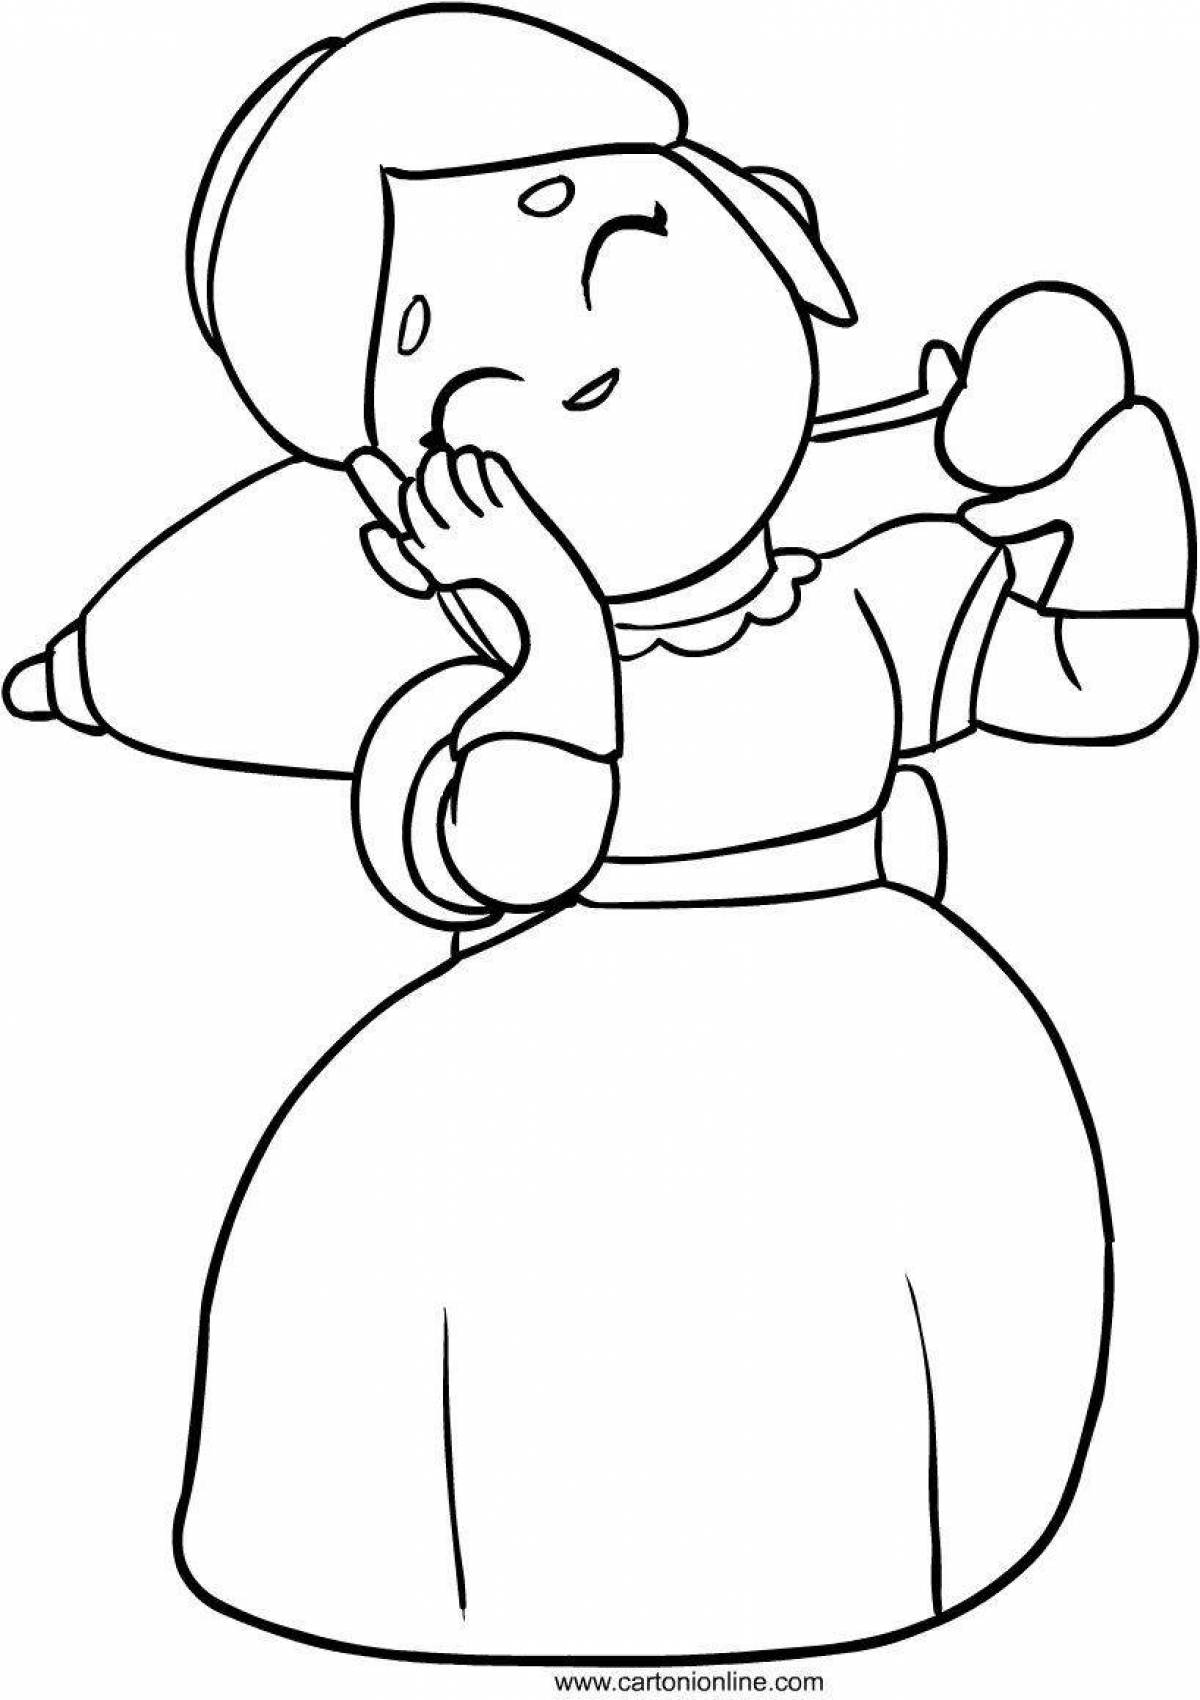 Exquisite Piper Coloring Page